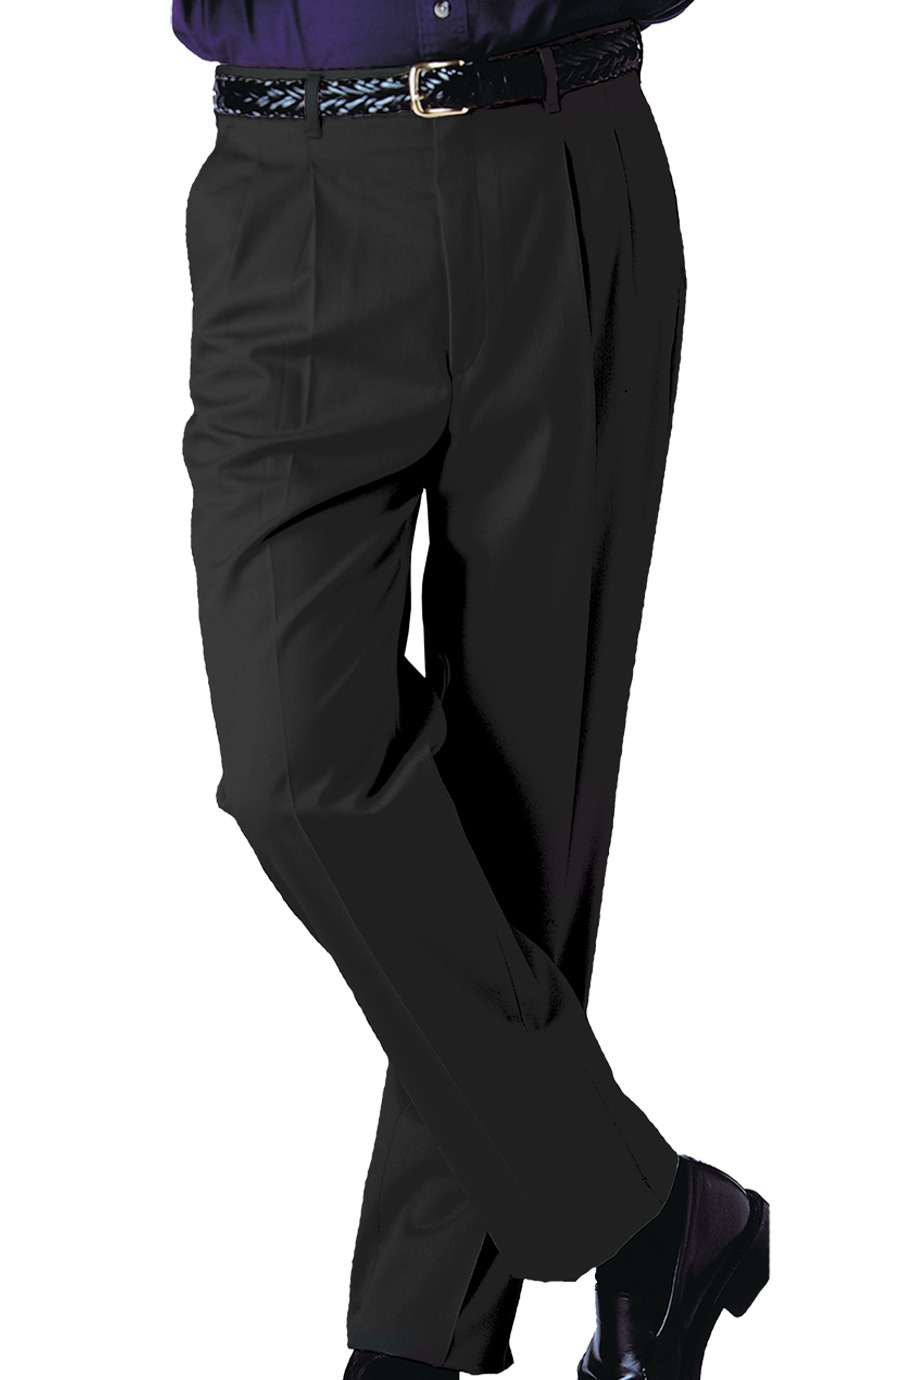 Edwards Garment 2610 - Men's Business Casual Pleated Pant